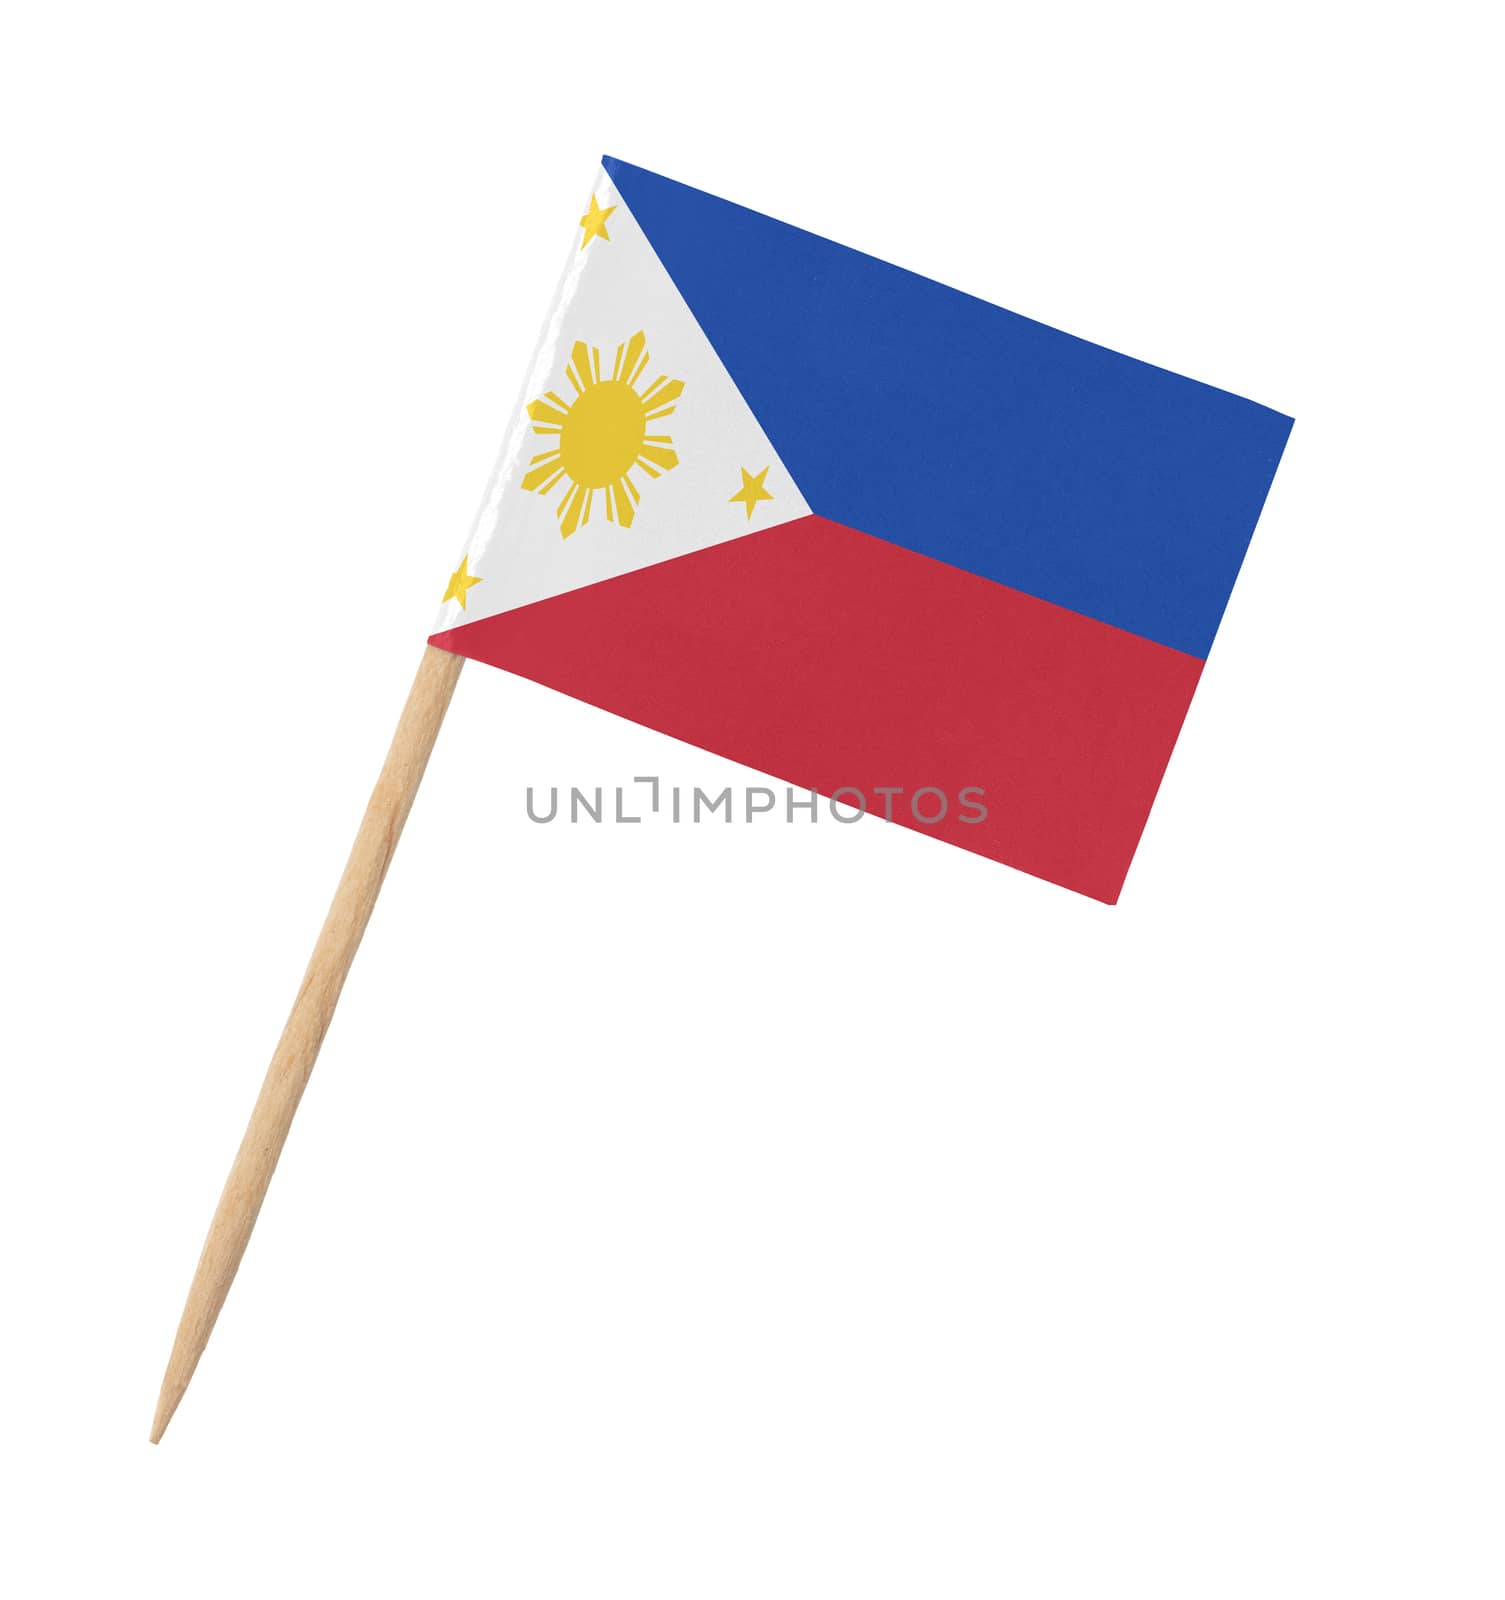 Small paper flag of the Philippines on wooden stick by michaklootwijk